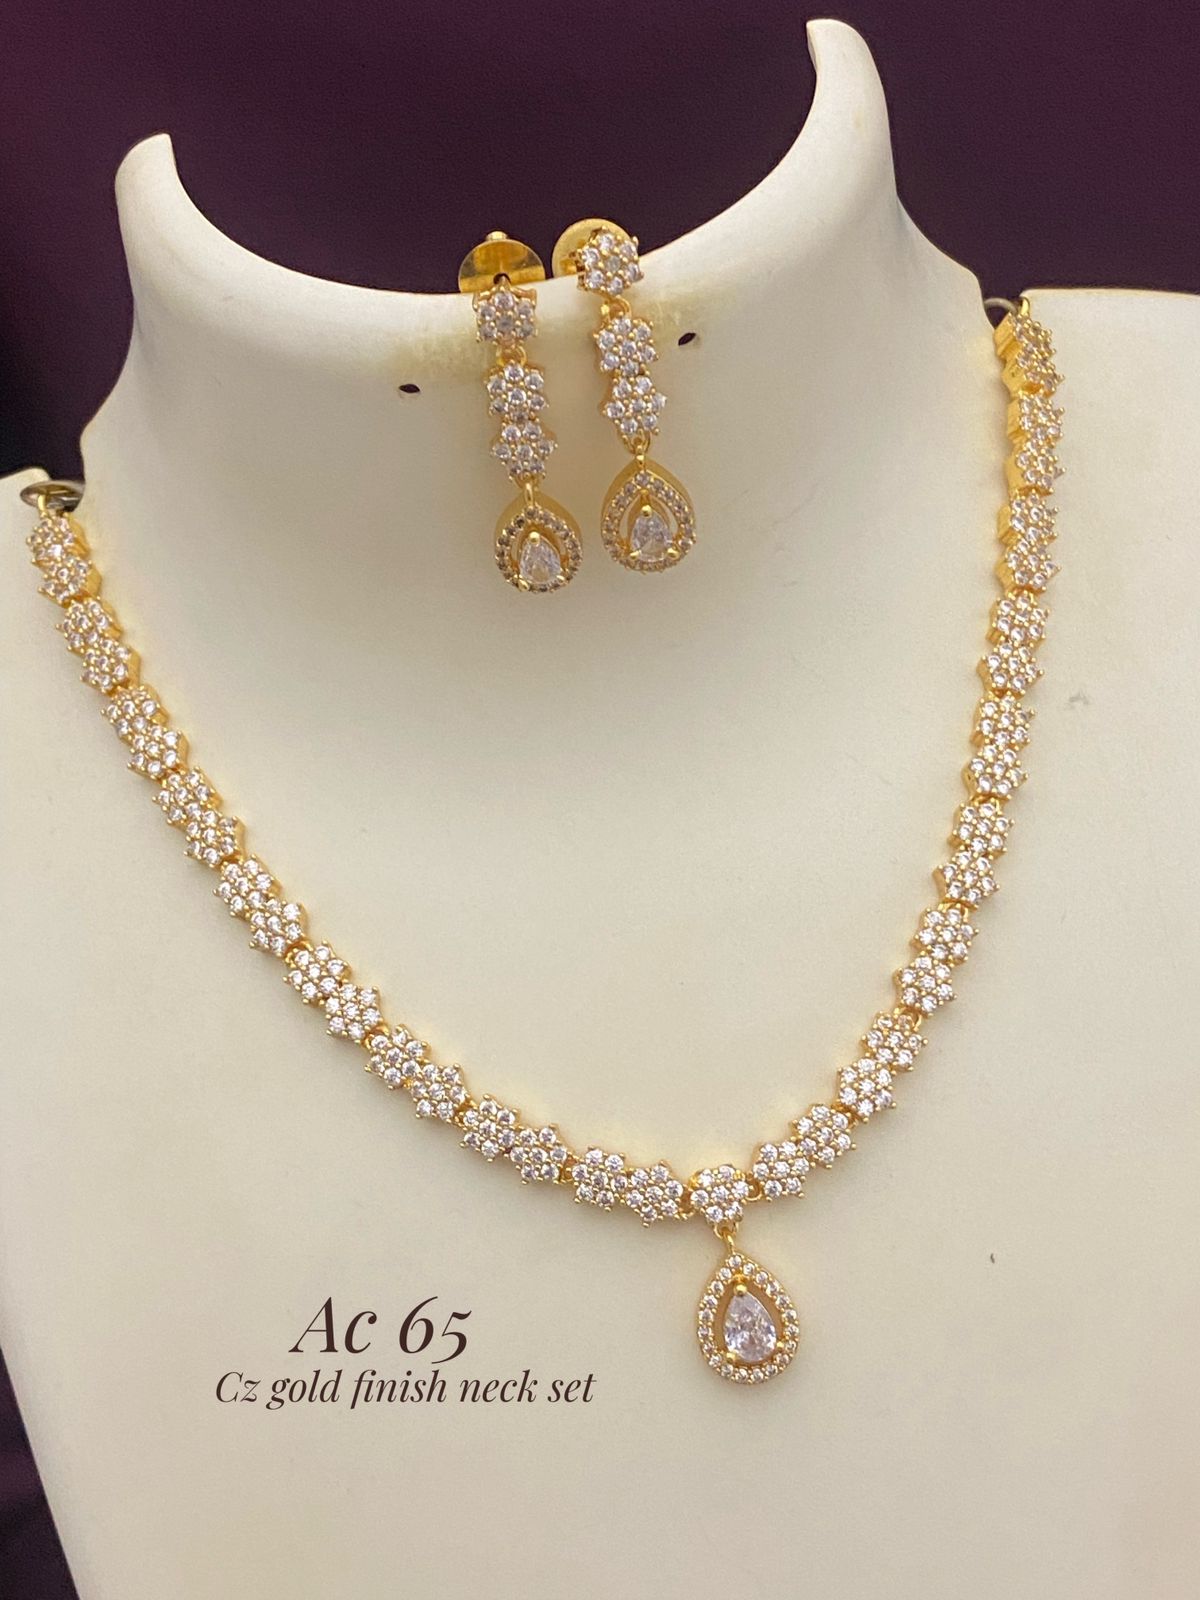 CZ gold finish simple necklace set with earrings